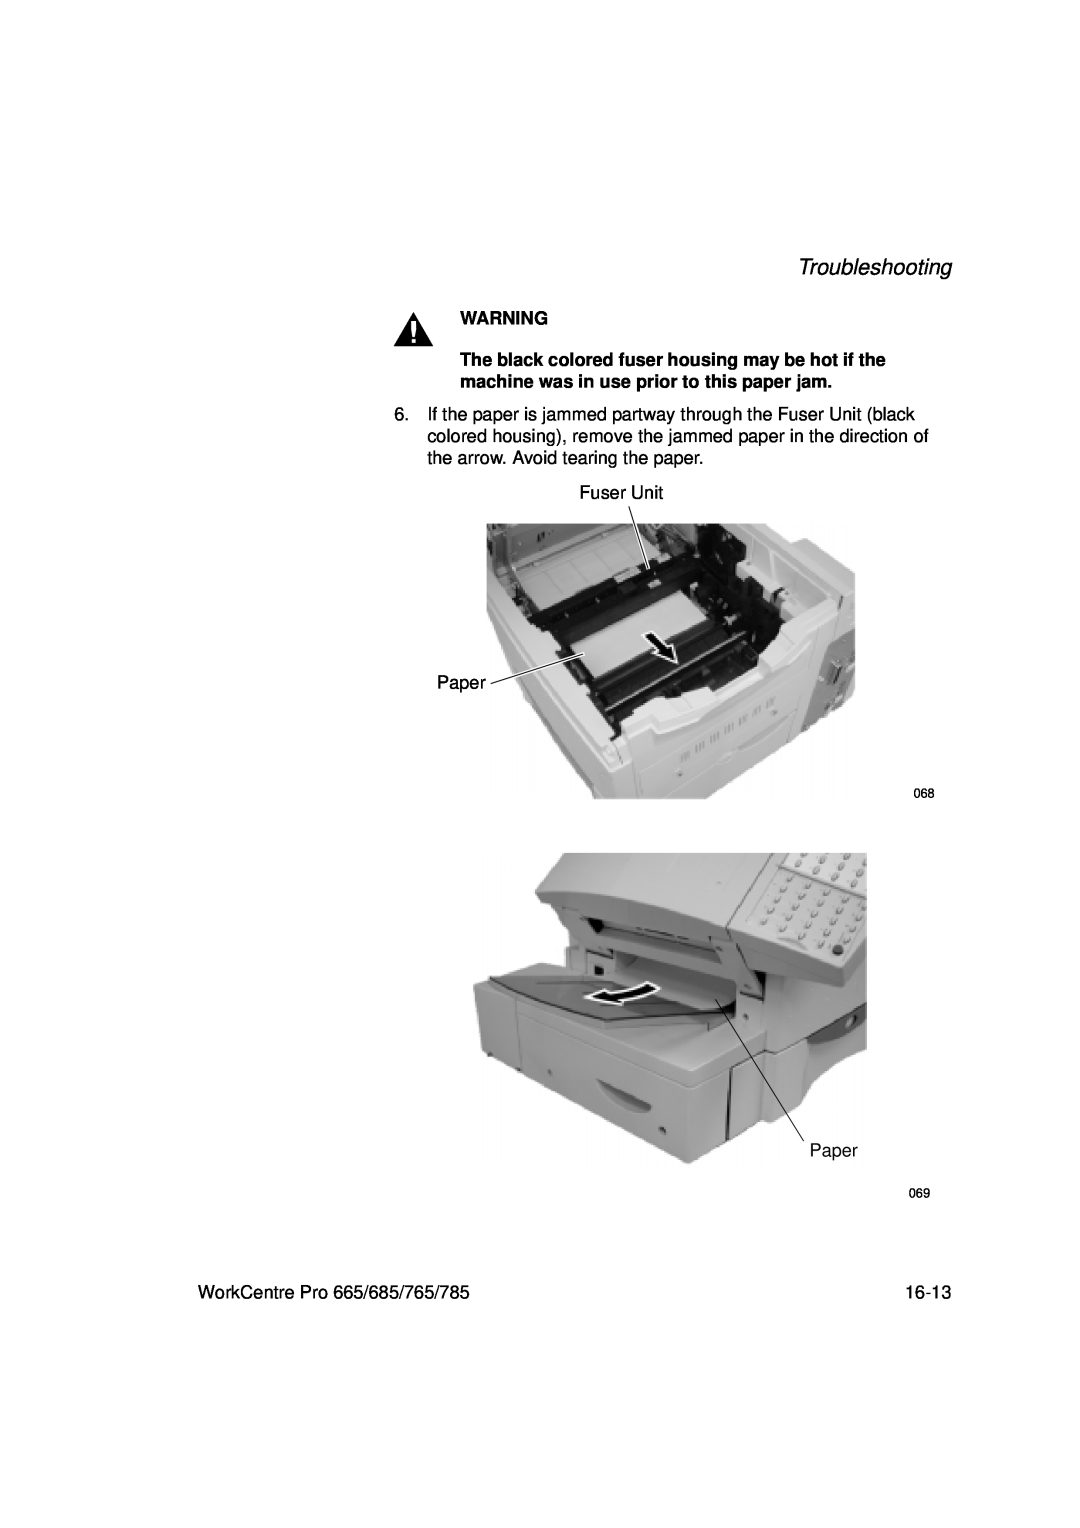 Xerox manual Troubleshooting, Fuser Unit Paper, WorkCentre Pro 665/685/765/785, 16-13 